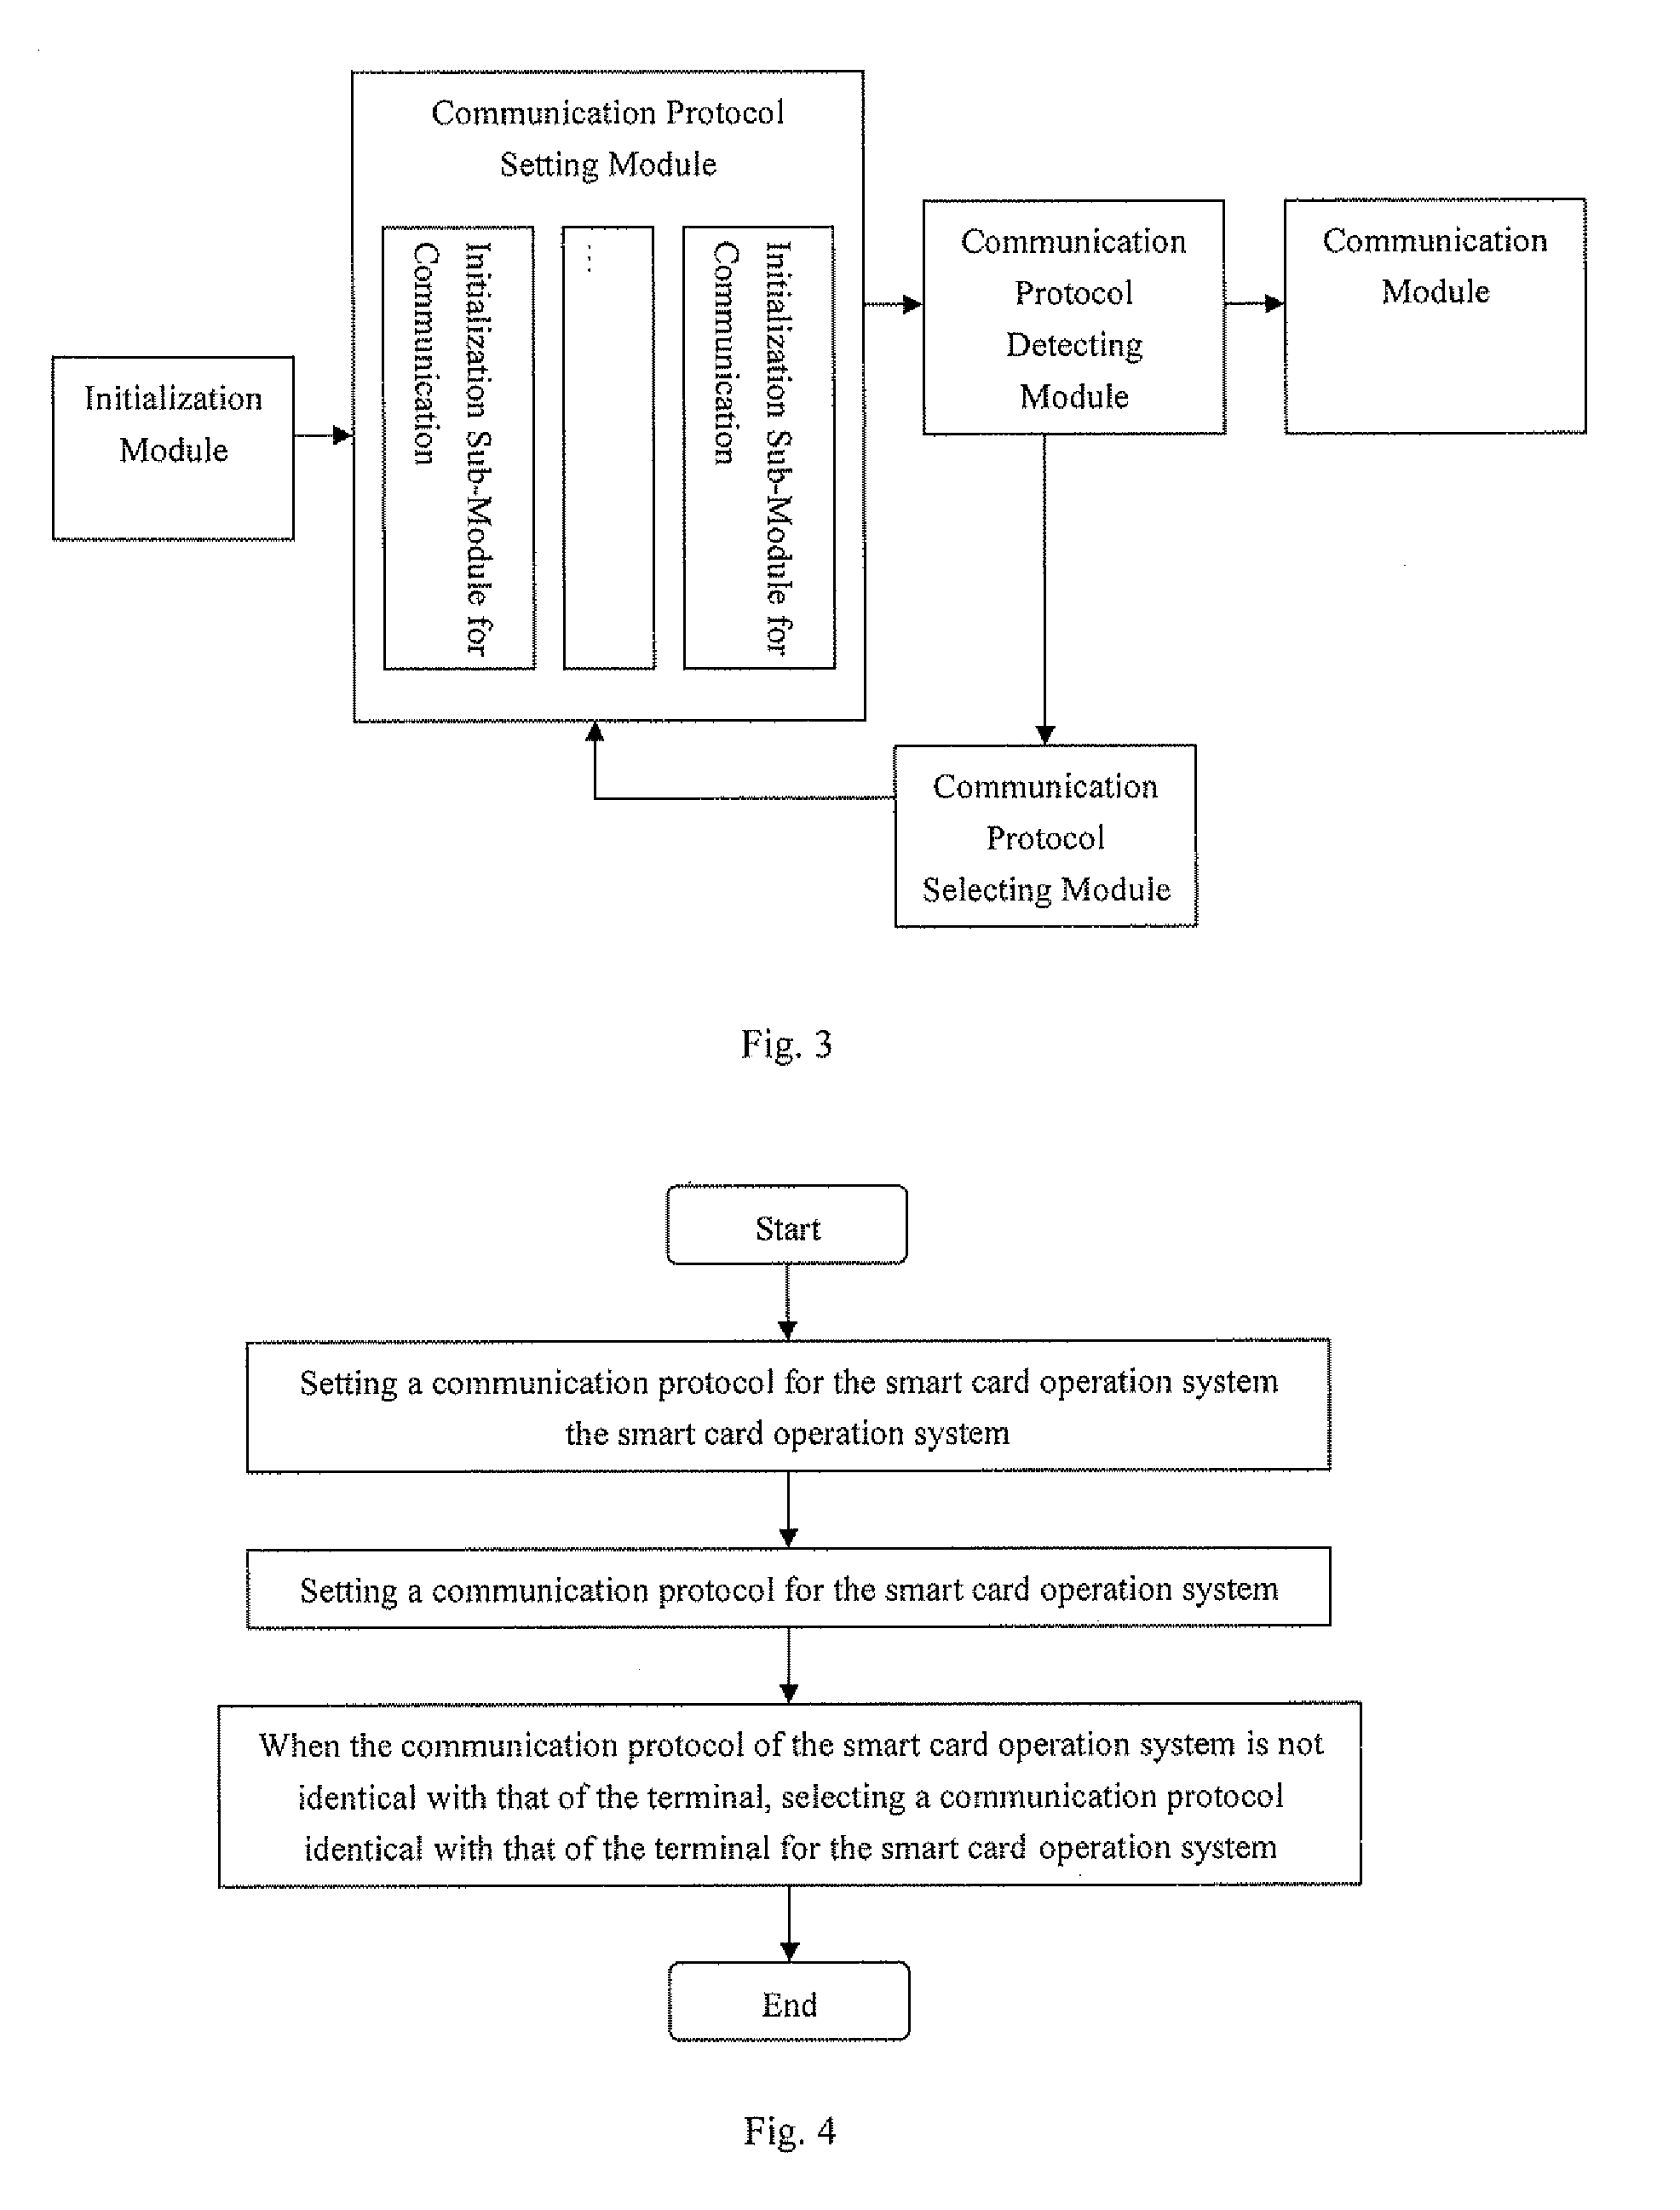 Equipment and method to implement adaptive functions of communication protocols